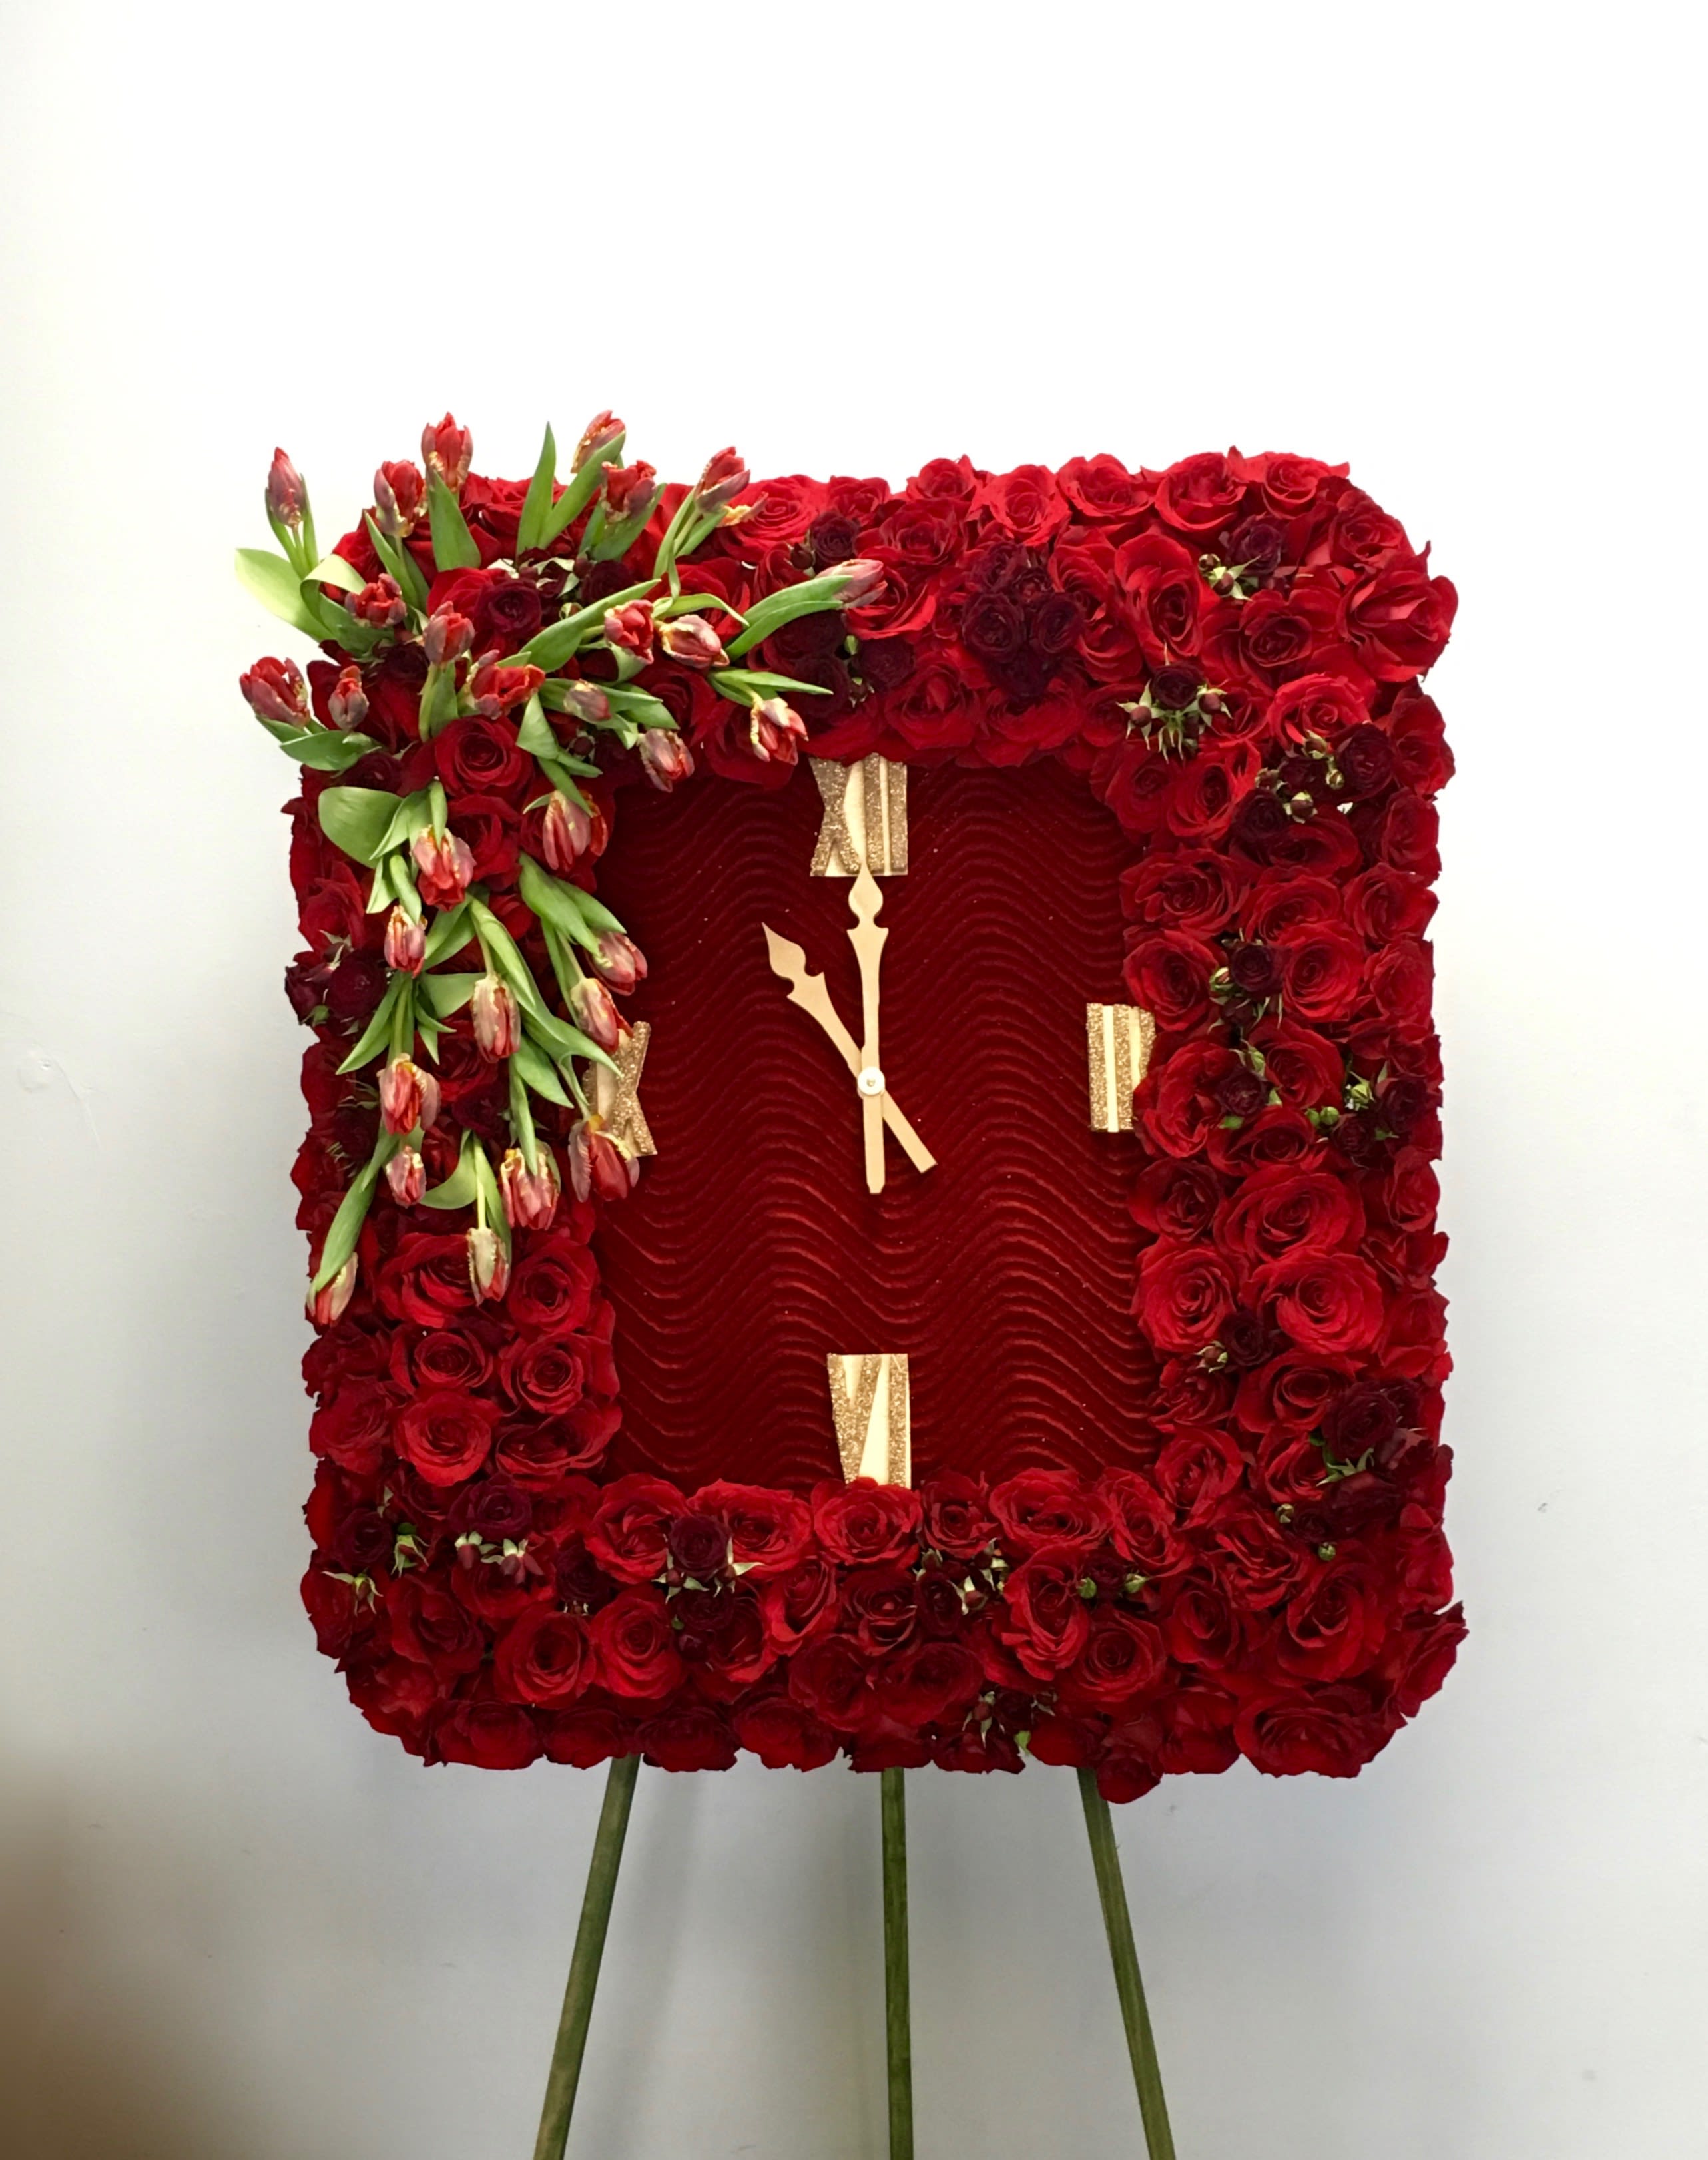 Red Tulips and Roses Frame  - Covered in red roses, this sympathy wreath also contains an accent of tulips in the upper corner. Frames are approximately 32 inches wide.  